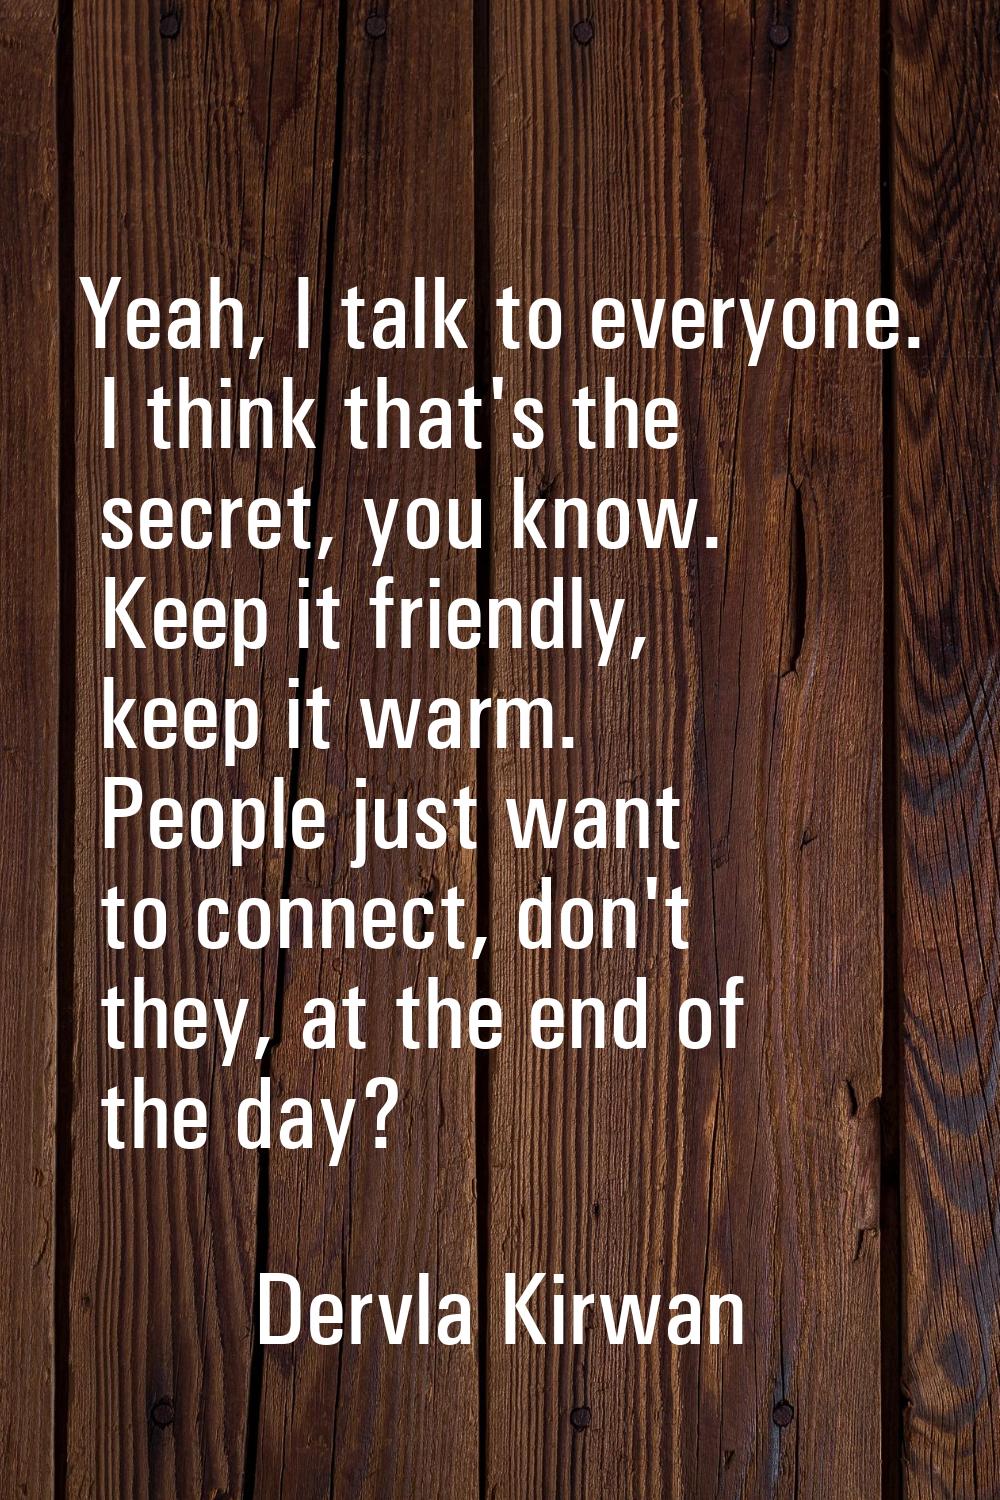 Yeah, I talk to everyone. I think that's the secret, you know. Keep it friendly, keep it warm. Peop